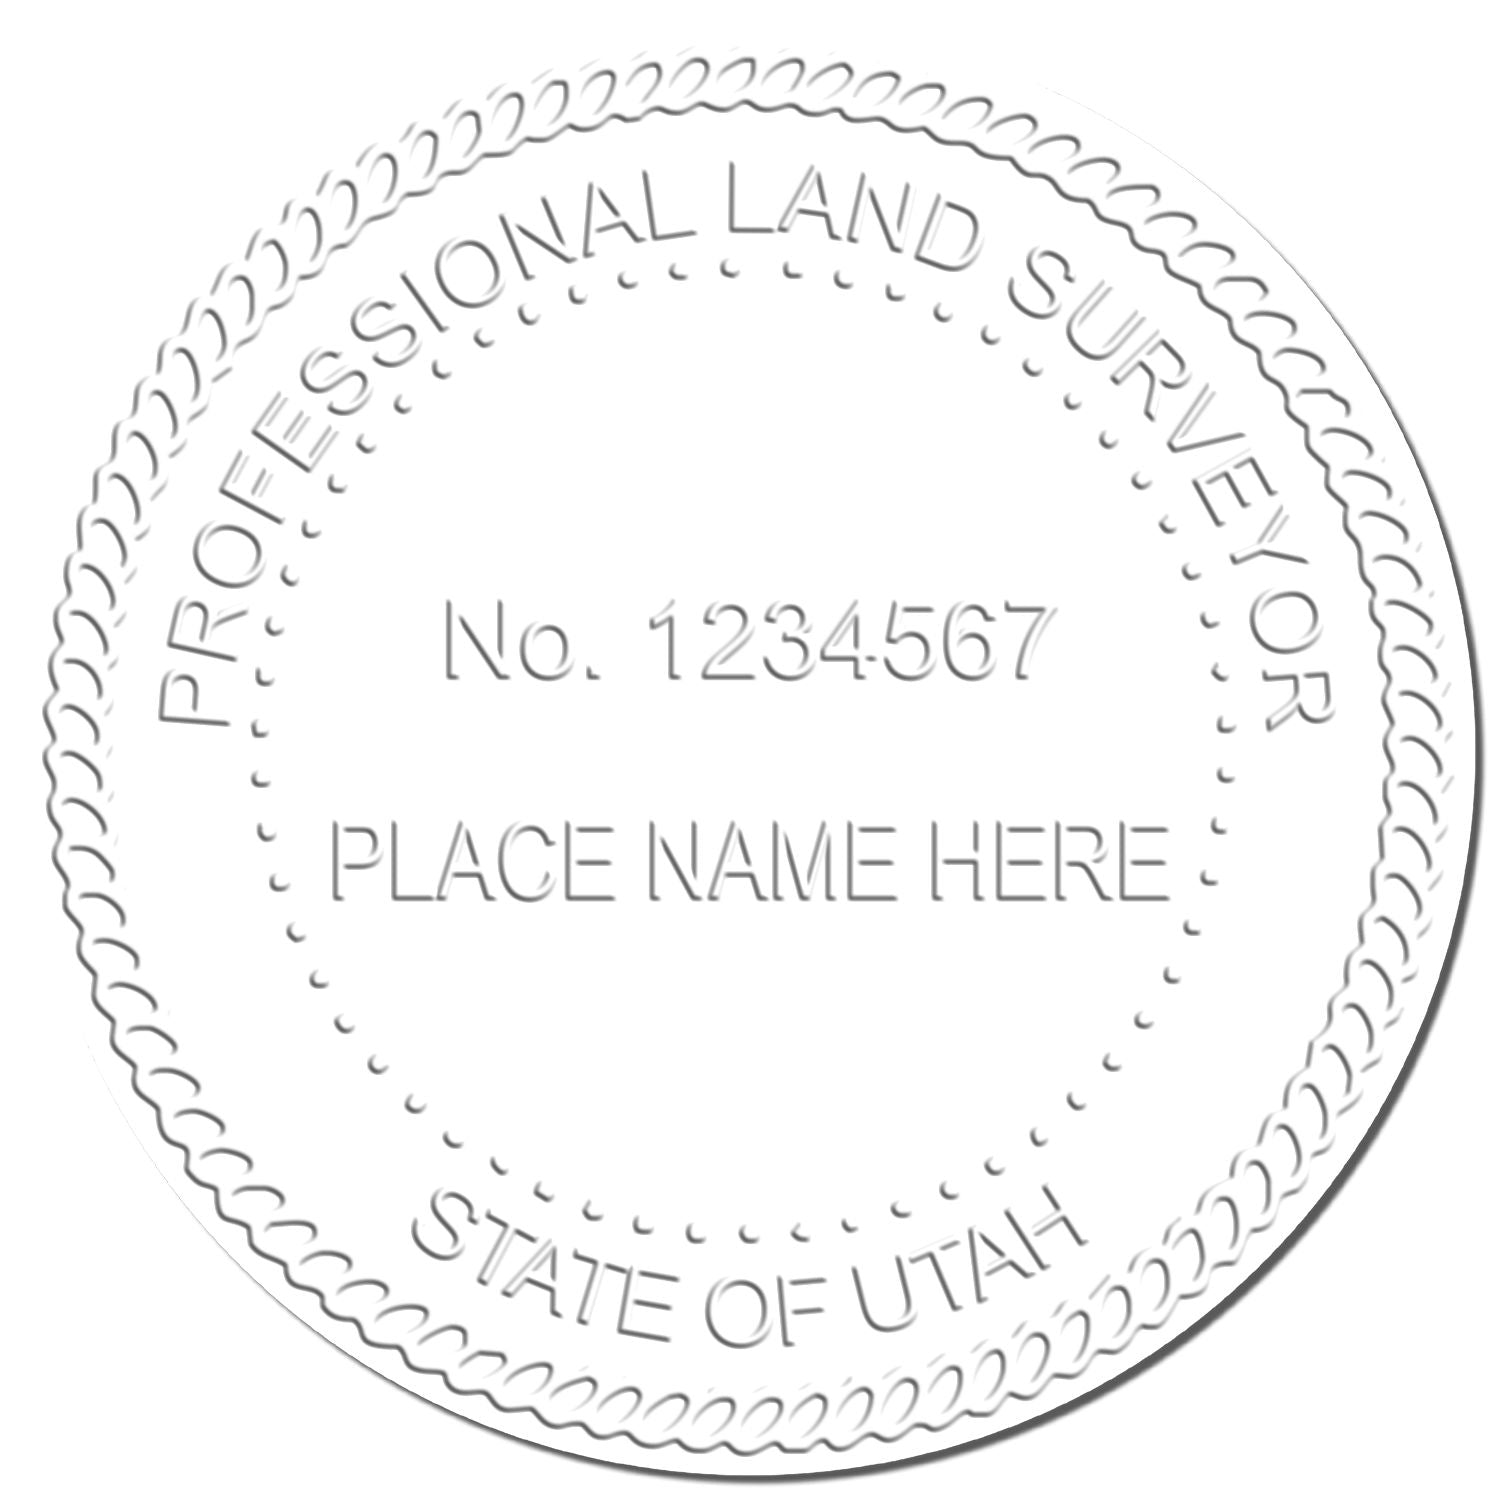 This paper is stamped with a sample imprint of the State of Utah Soft Land Surveyor Embossing Seal, signifying its quality and reliability.